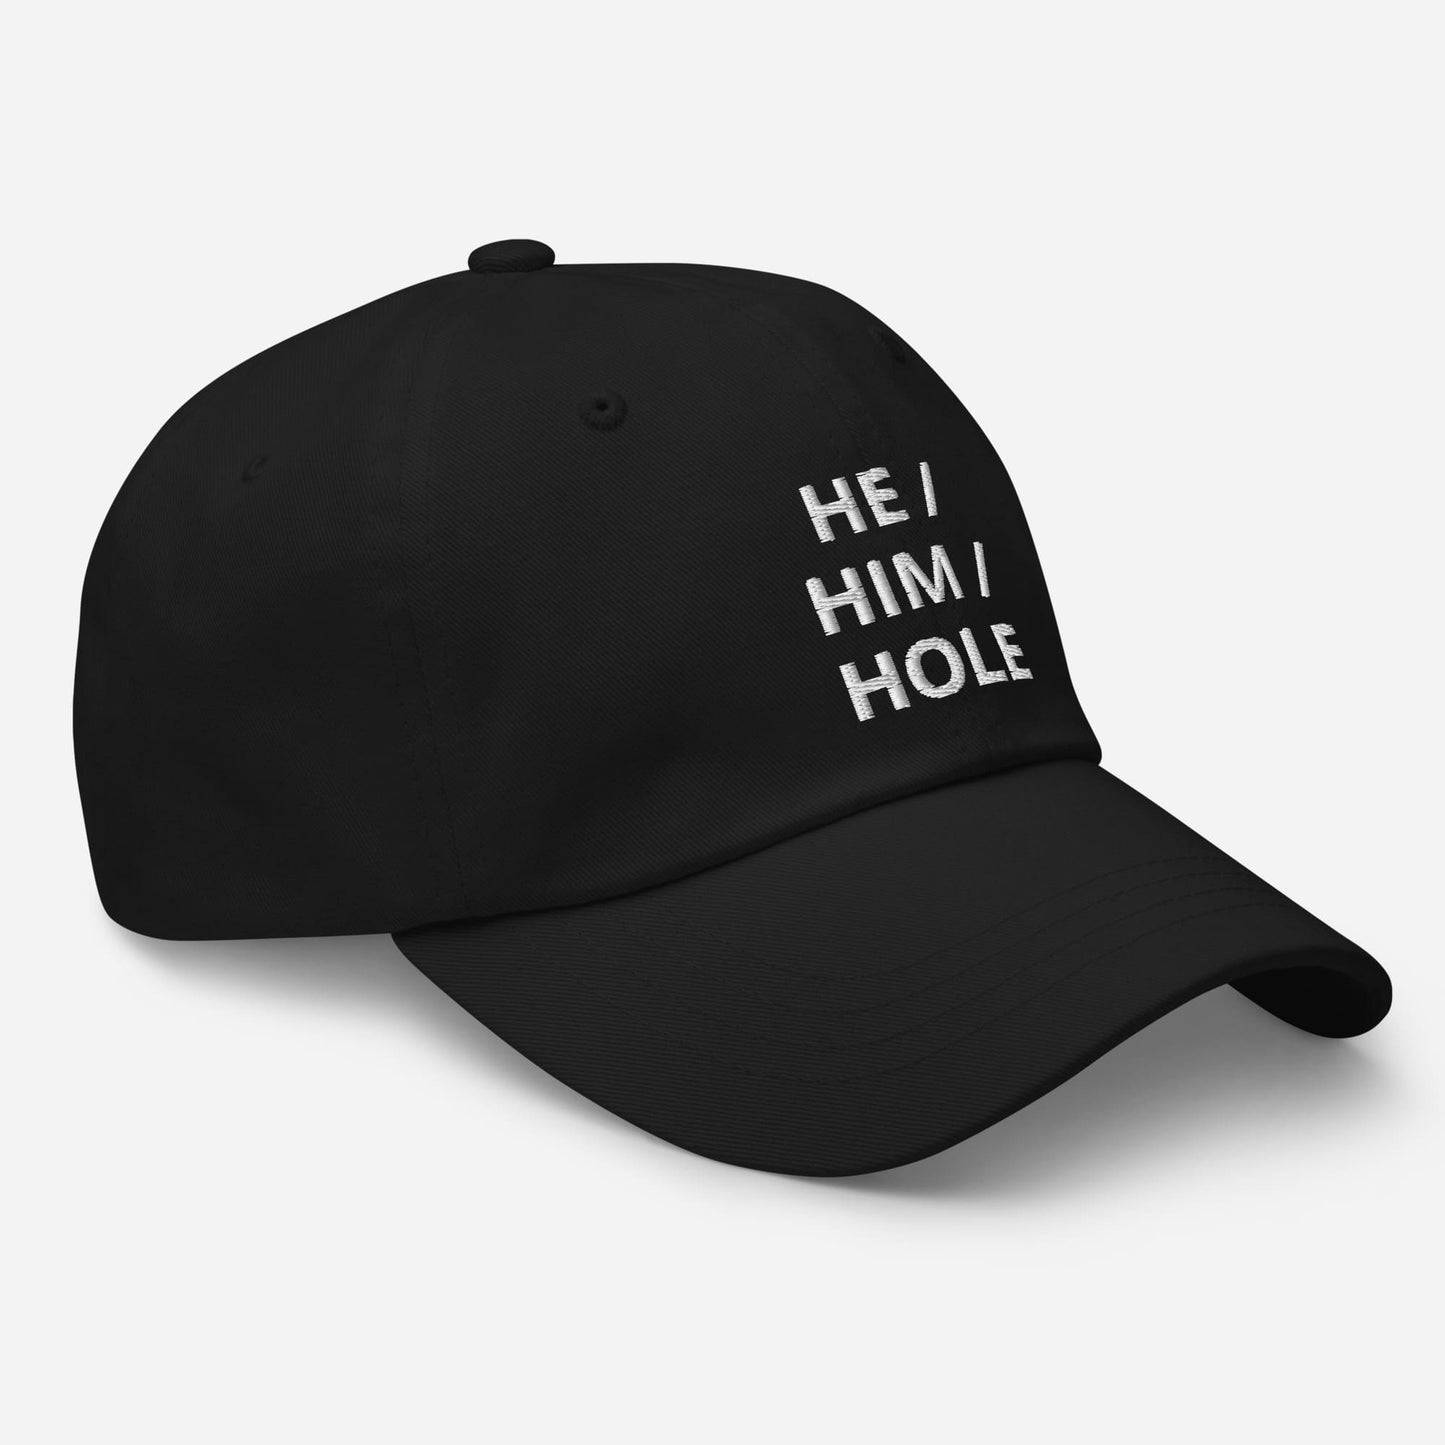 gay hat, embroidered mlm he him hole pronouns cap, black side